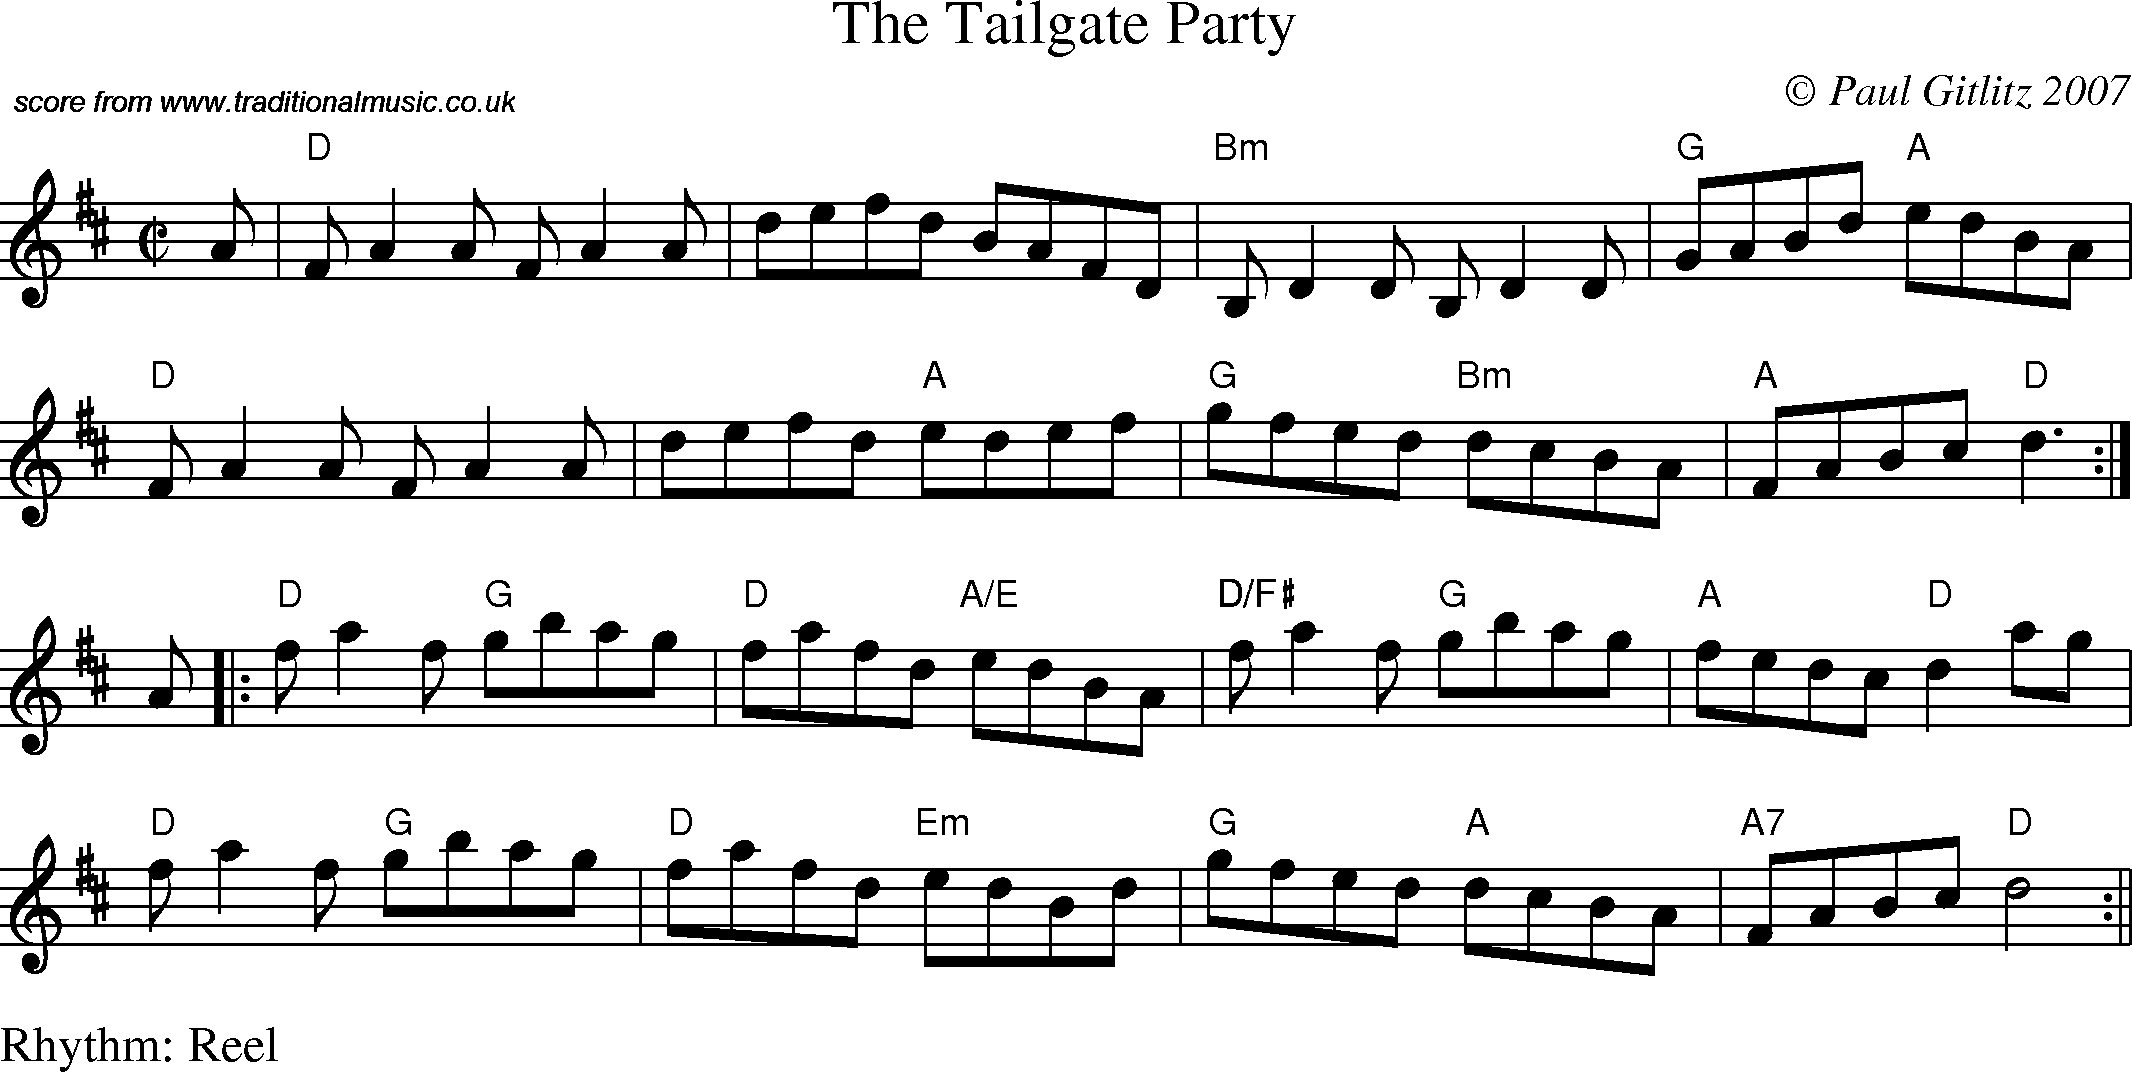 Sheet Music Score for Reel - The Tailgate Party